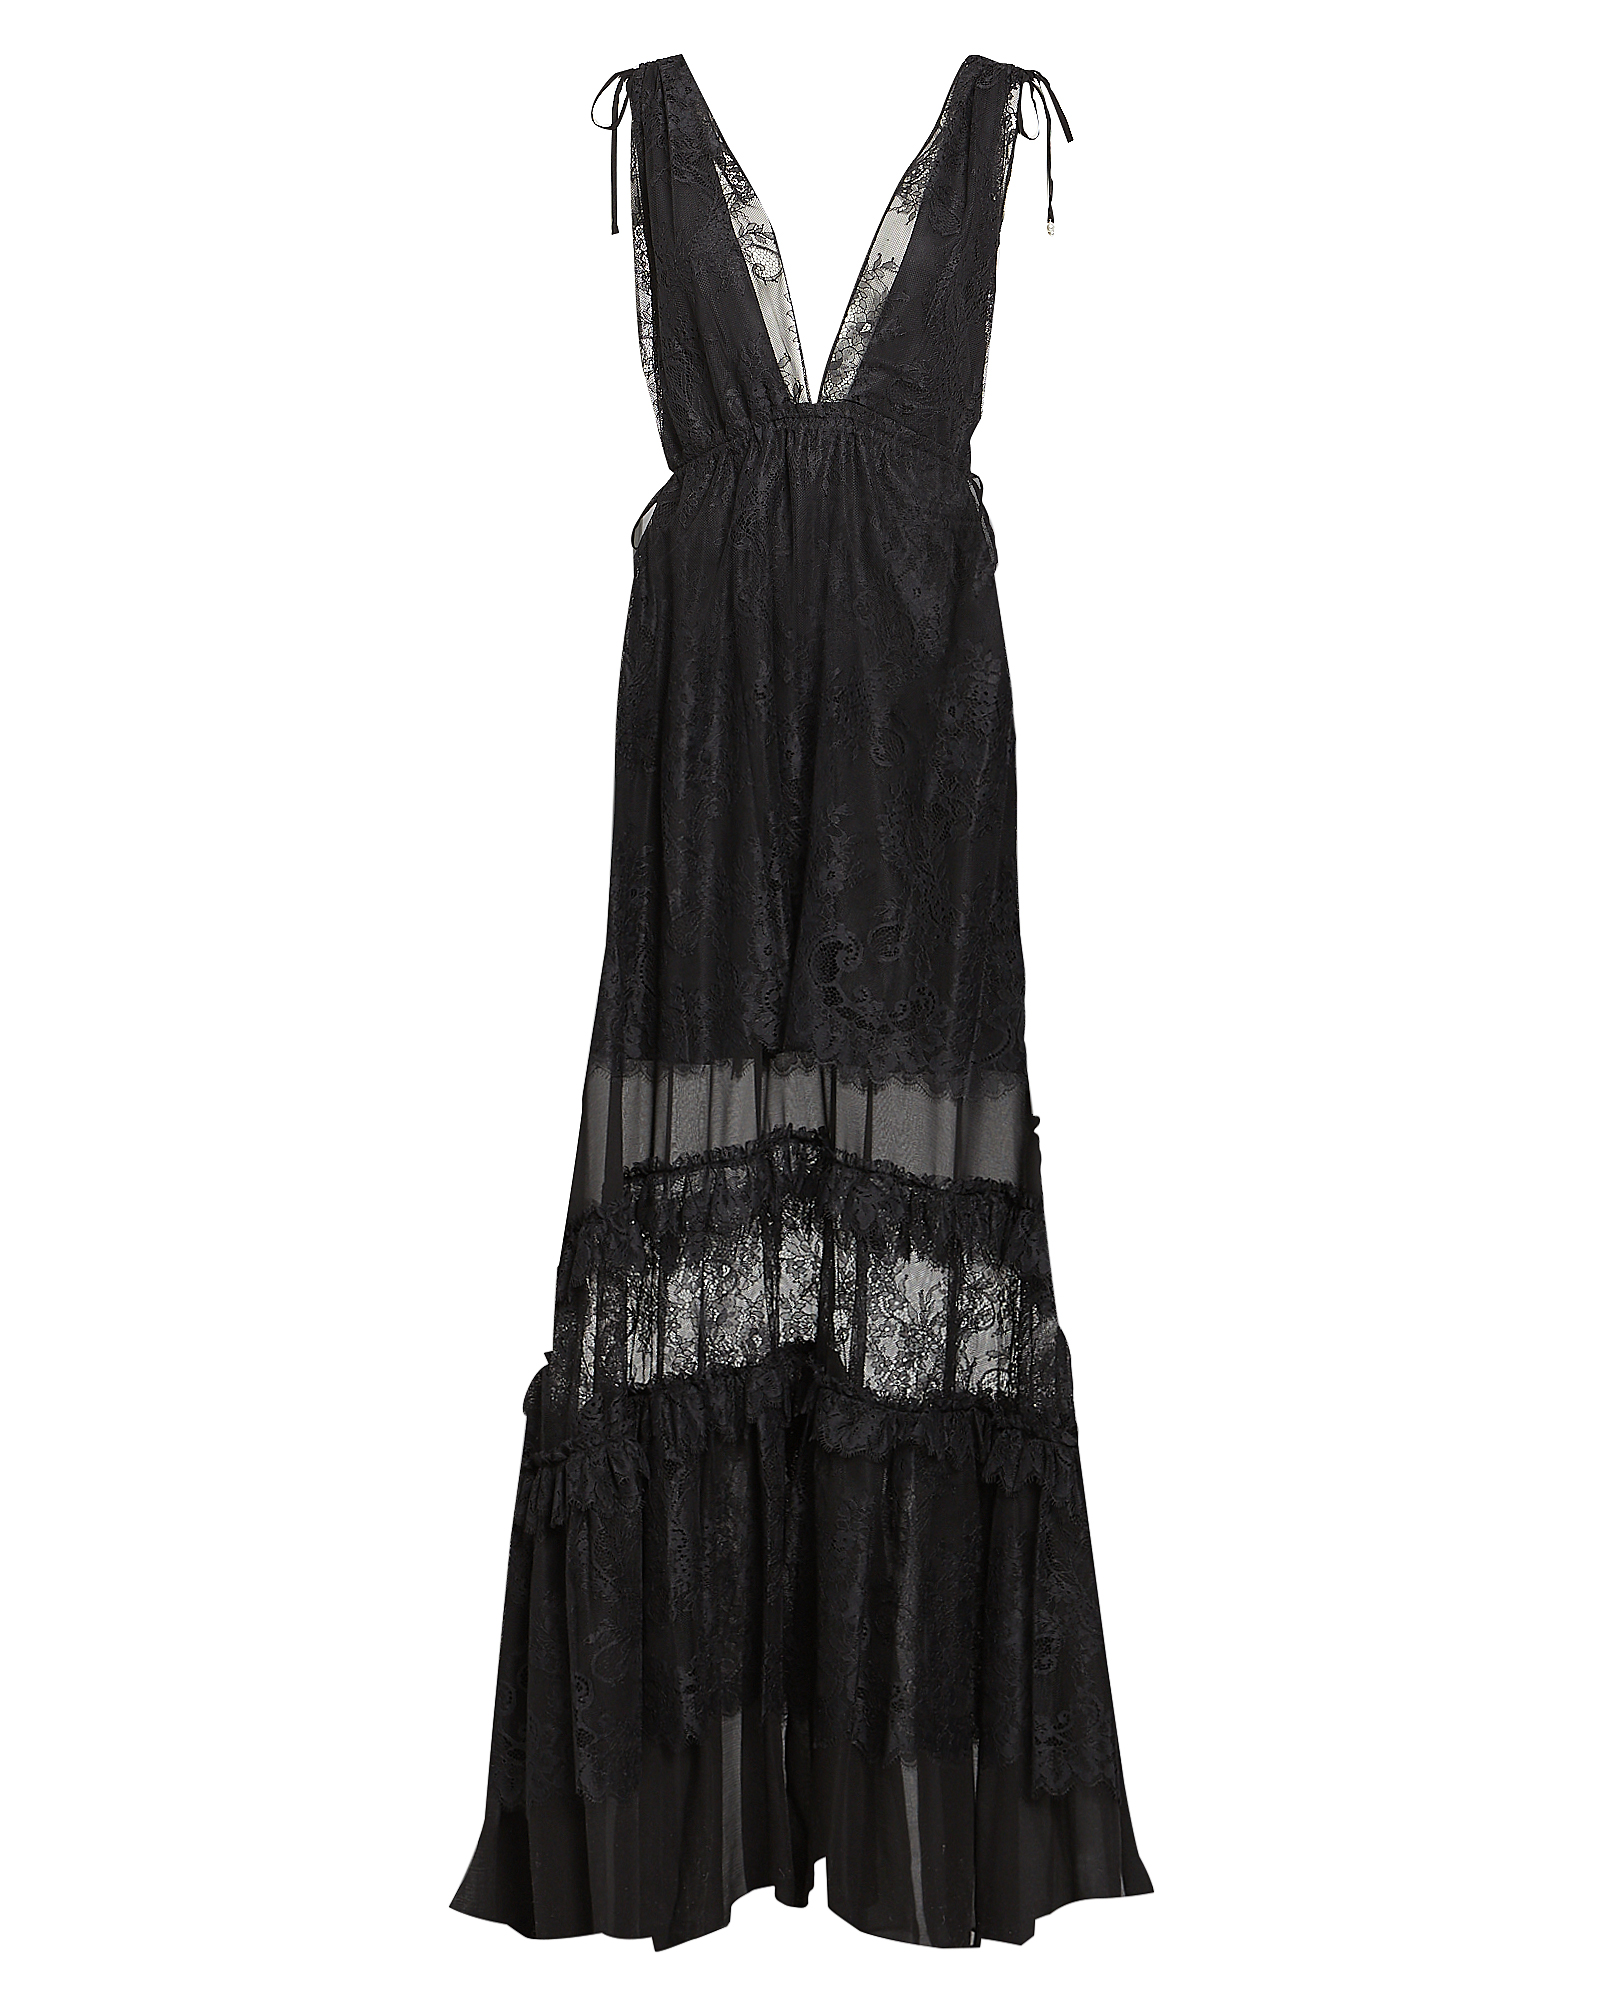 Alexis | Umbra Tiered Lace Gown | INTERMIX®